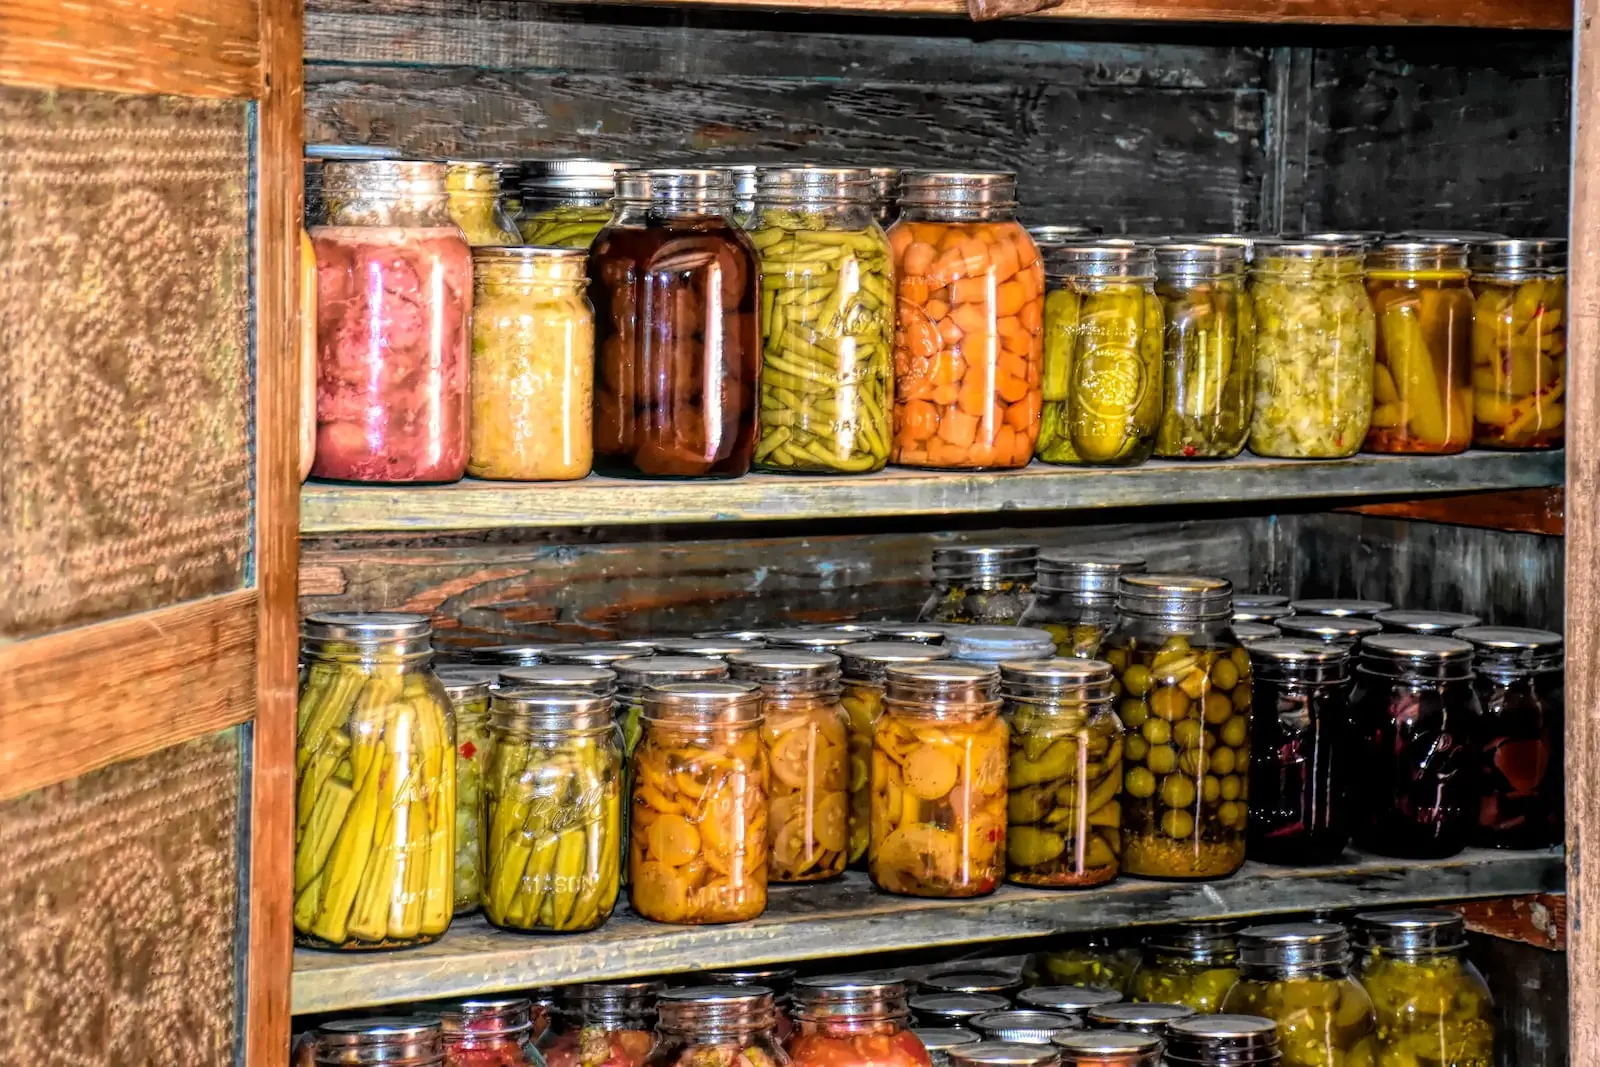 What Are the Best Ways to Preserve and Store Food Without Refrigeration?